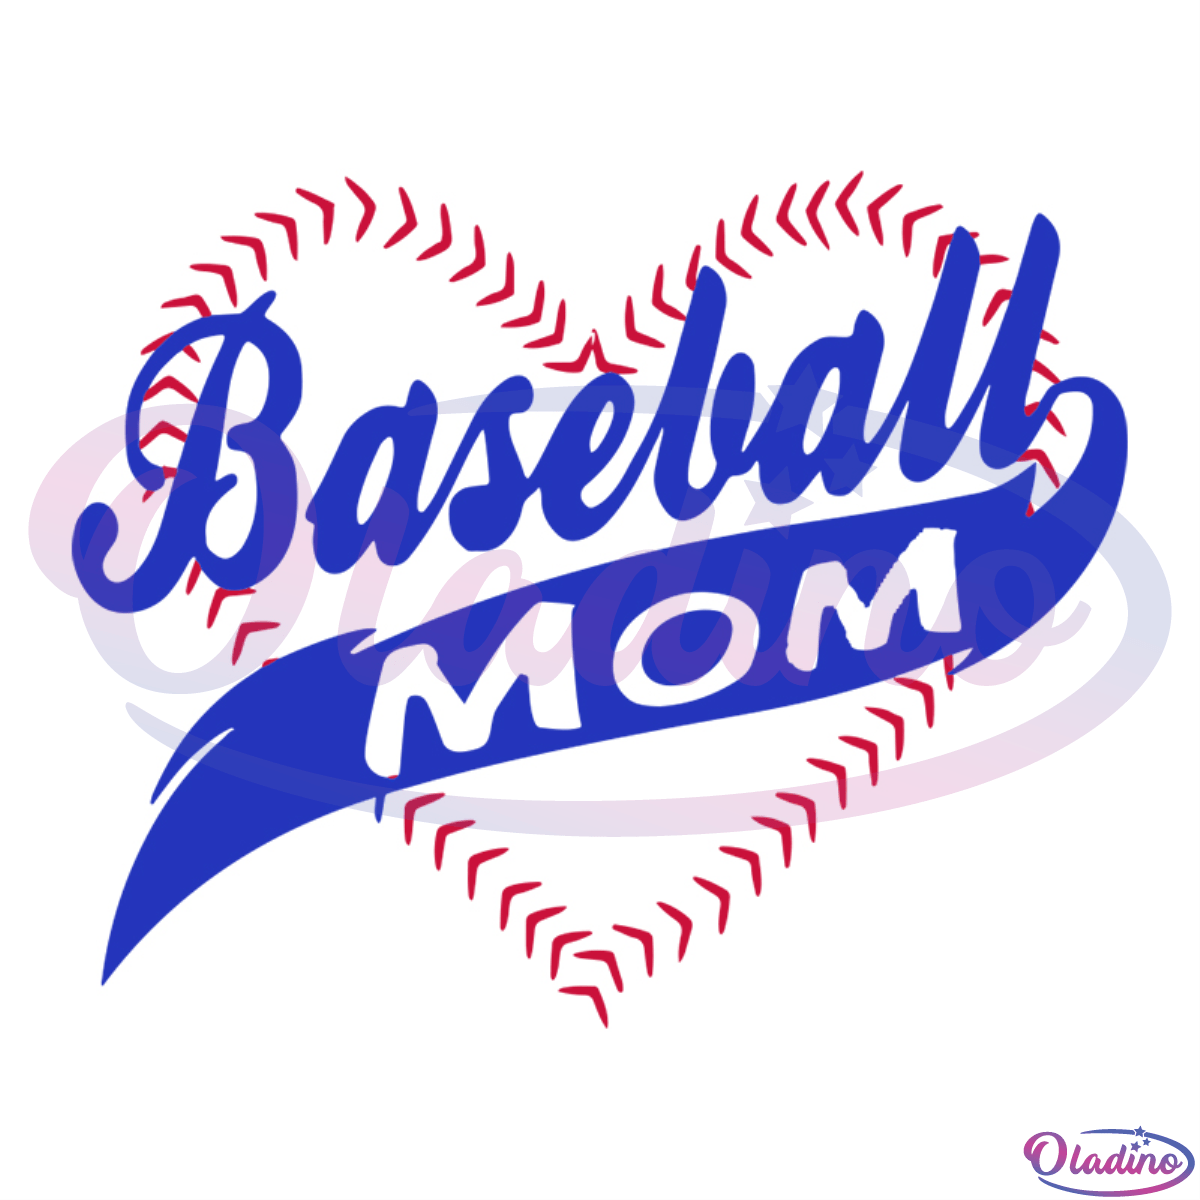 alex maroni recommends baseball mom images pic